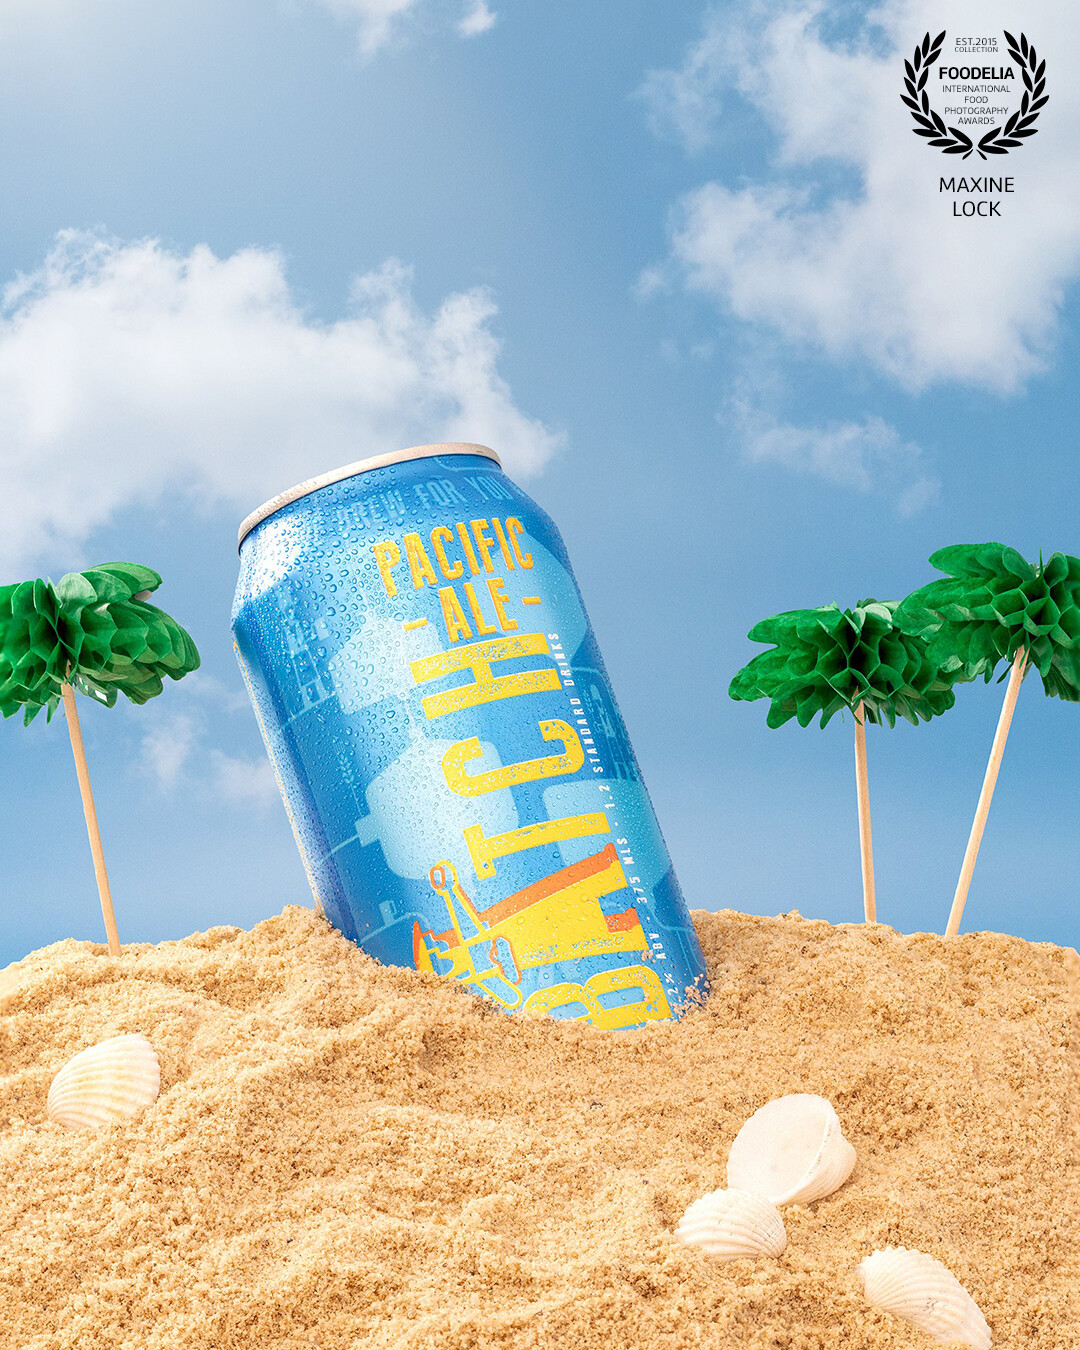 Single can of beer in a "beach in the summer" scene.  The beach scene re-created in a studio setting.